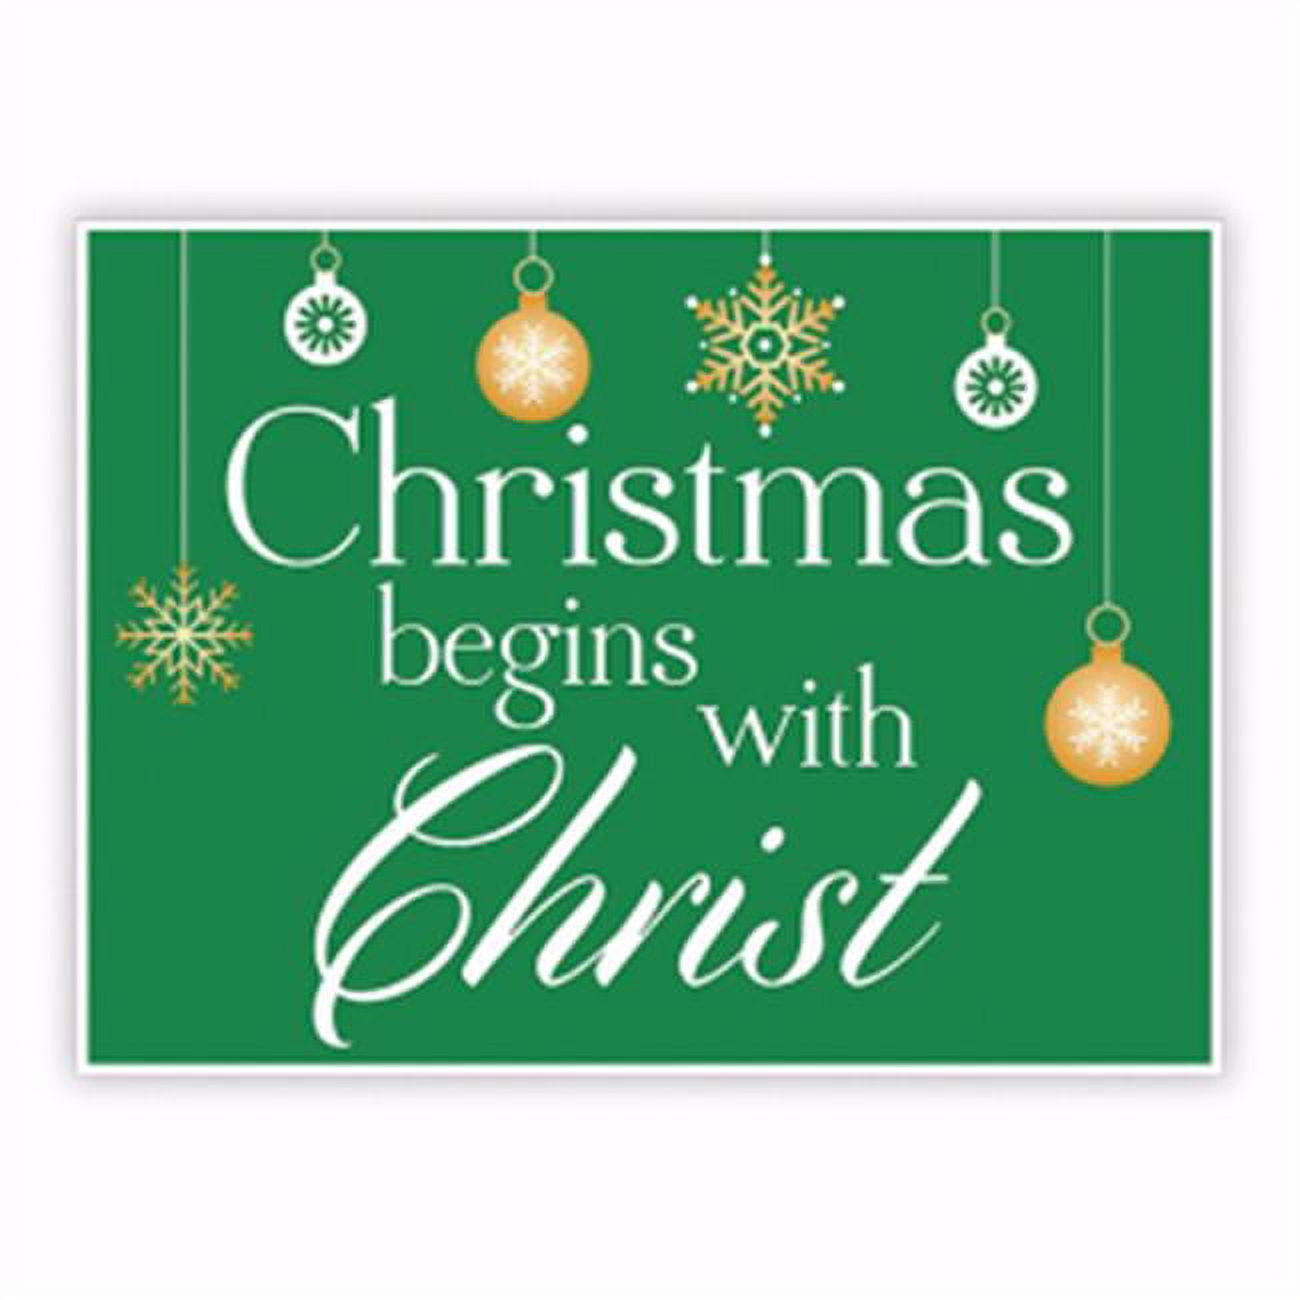 163883 24 X 18 In. Christmas Begins With Christ Yard Sign